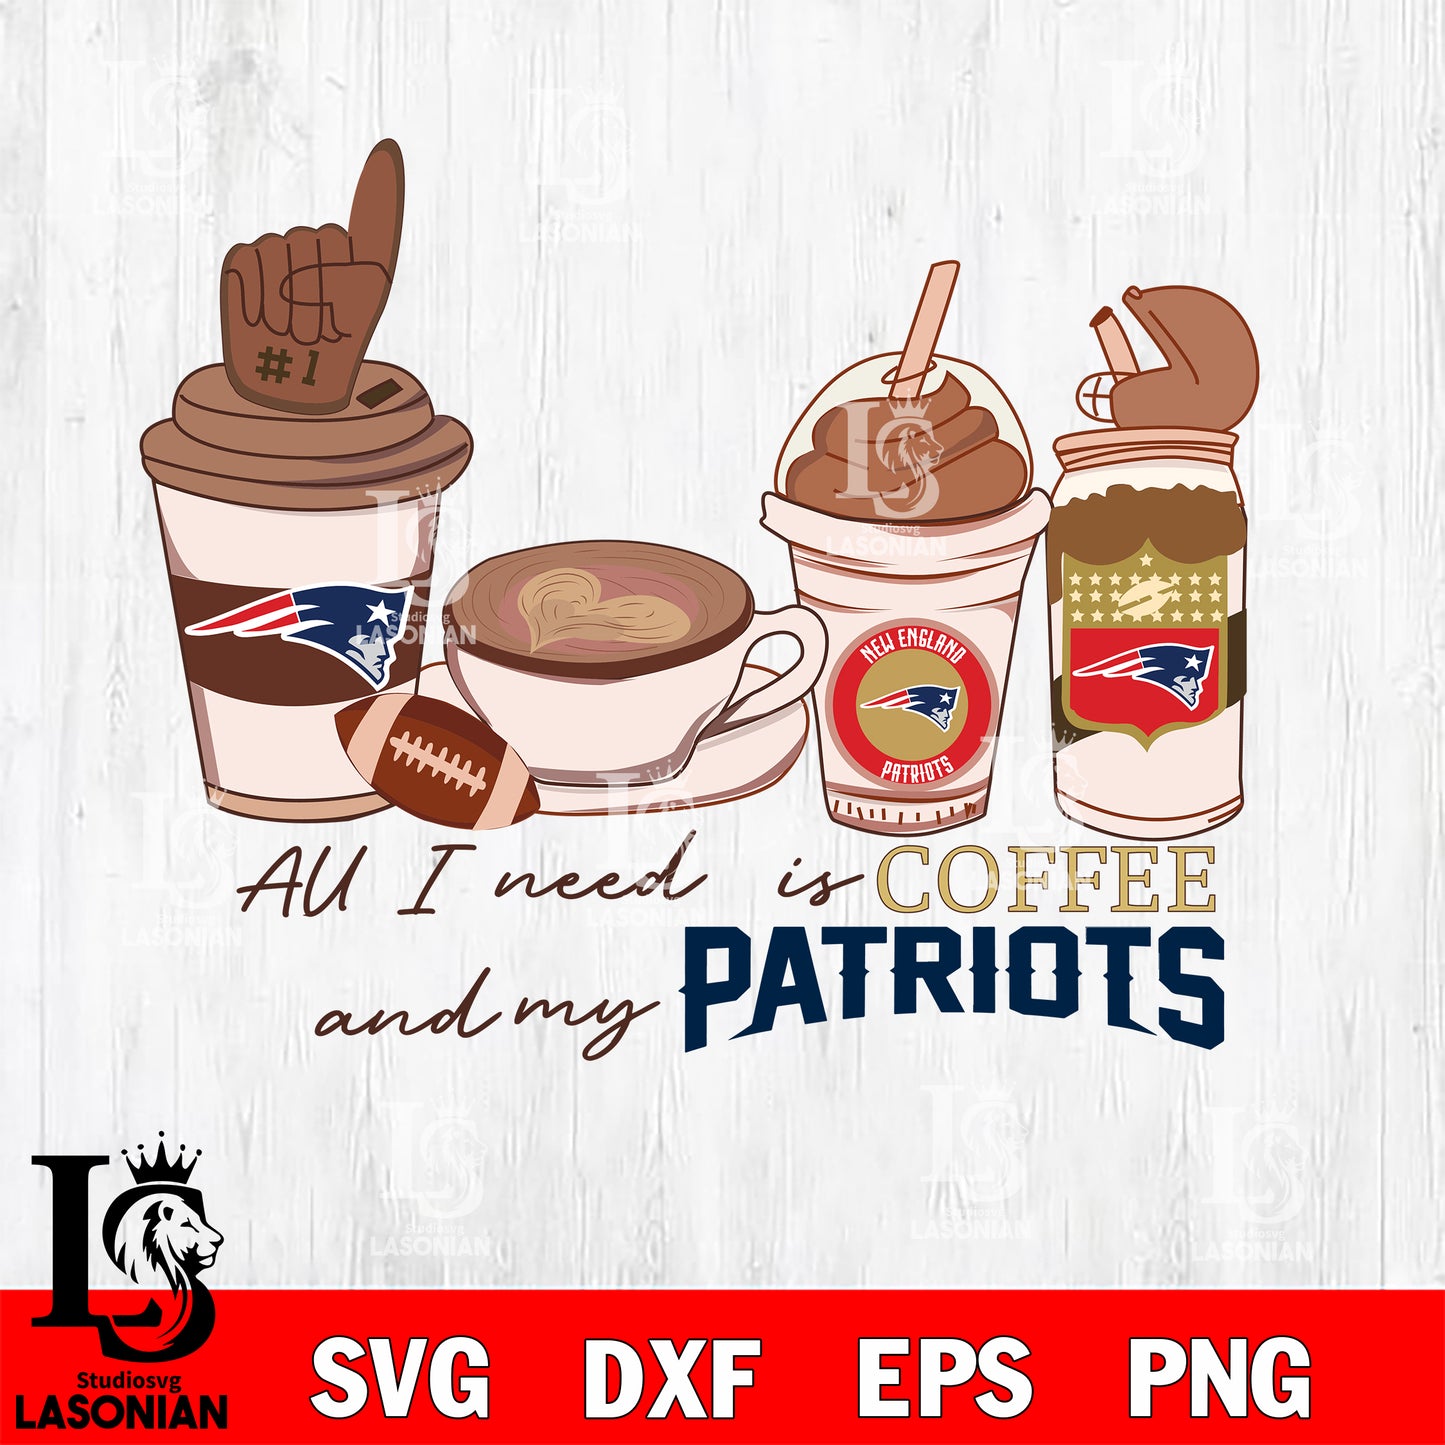 All i need is coffee and my -New England Patriots svg,eps,dxf,png file , digital download